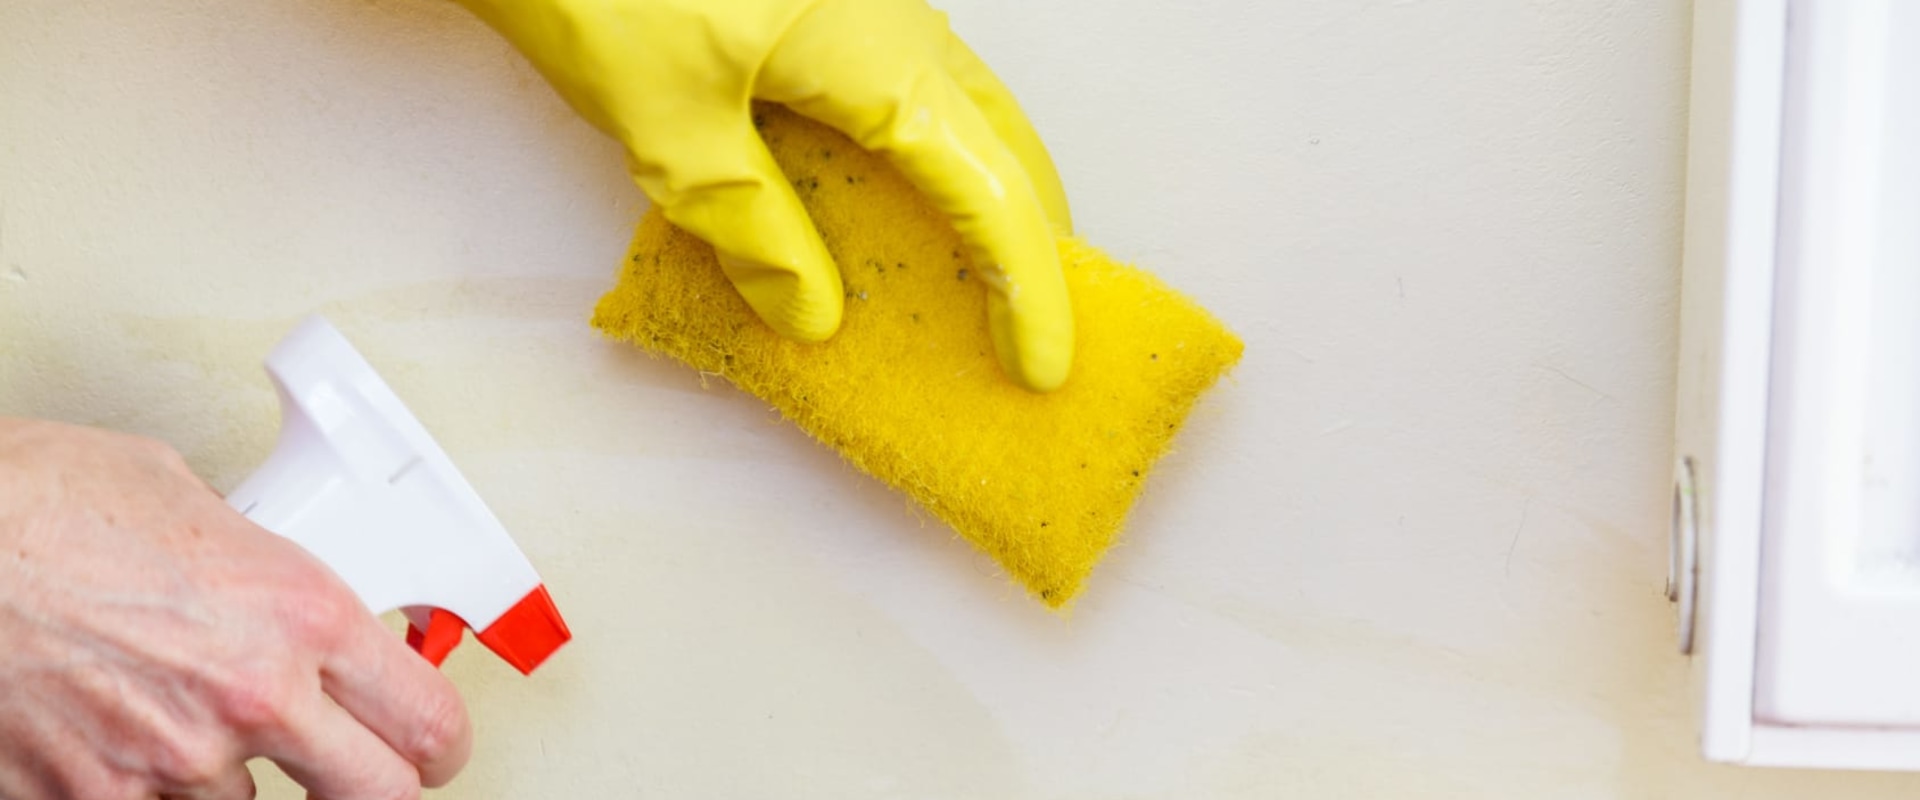 Should You Leave During Mold Remediation?